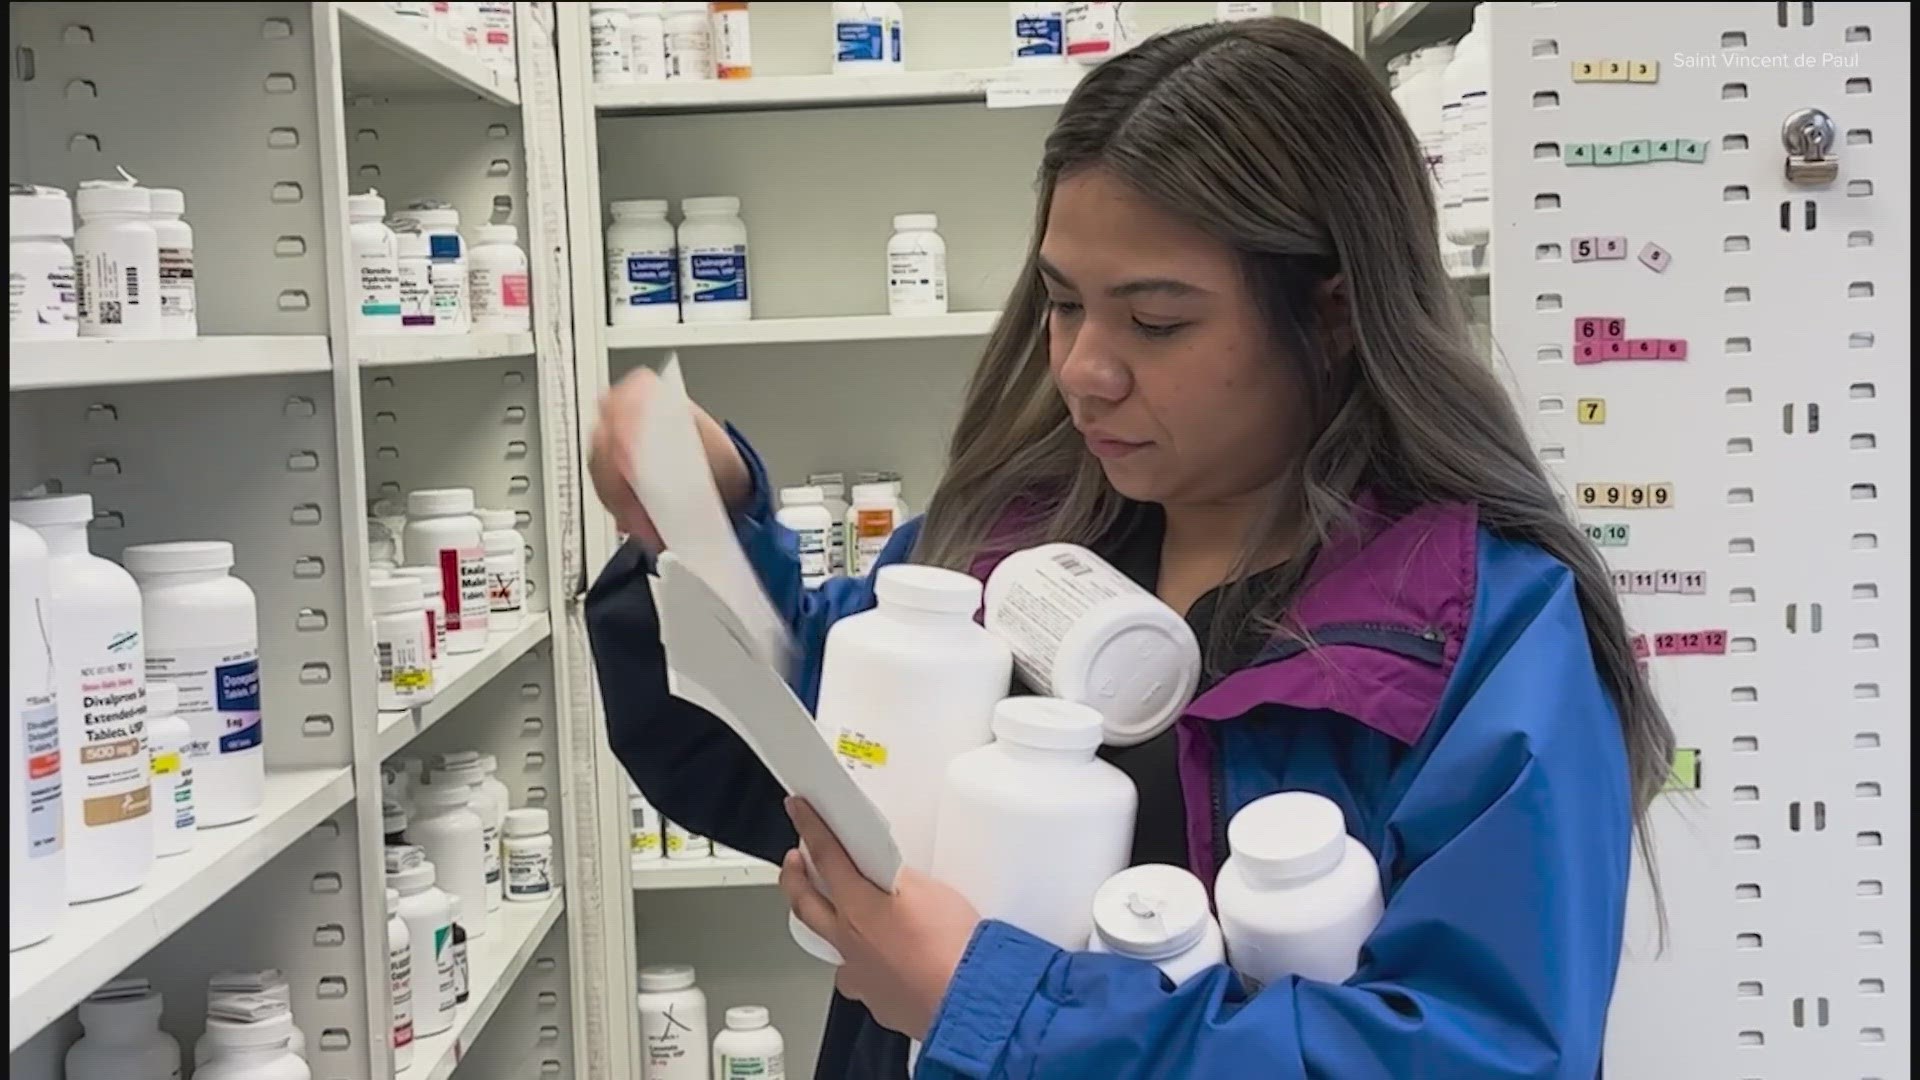 A new program is helping Austinites who can't afford their medication. The St. Vincent De Paul Pharmacy of Texas fills prescriptions for free for those in need.